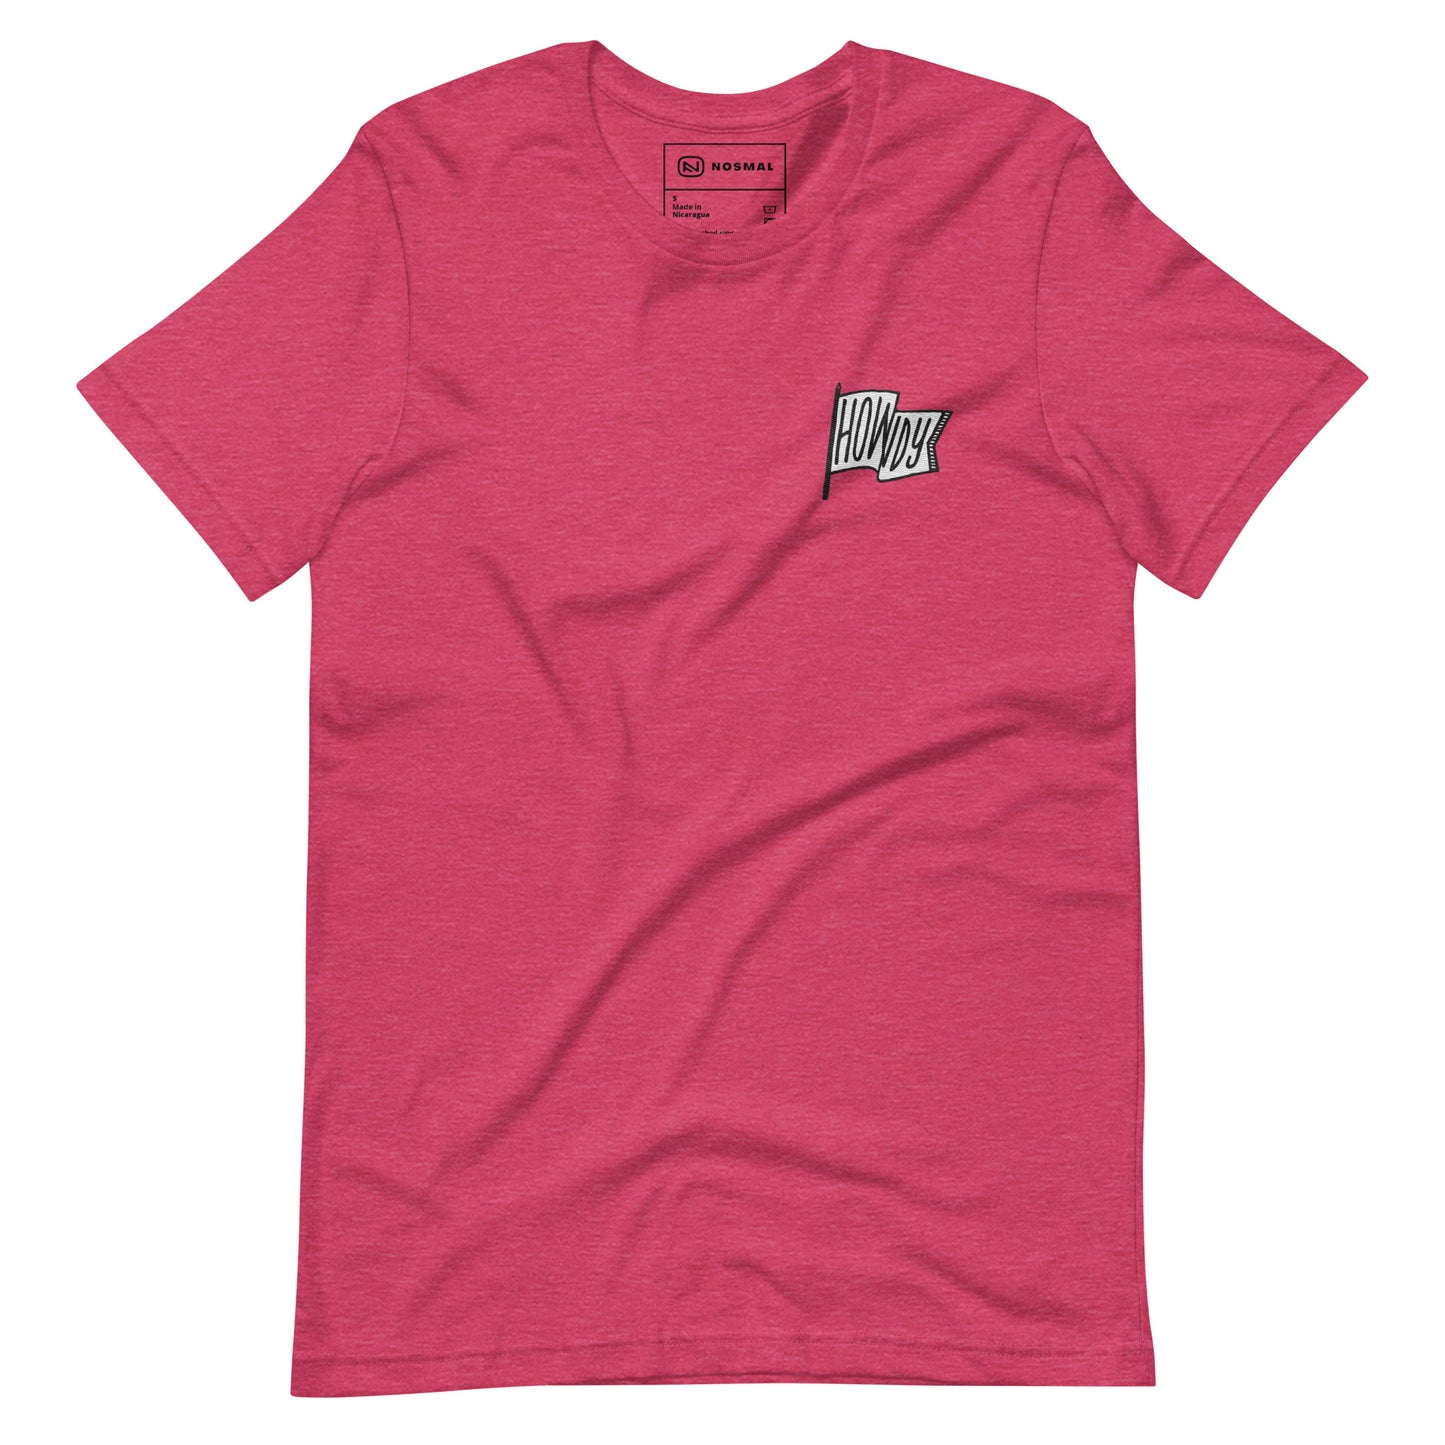 Straight on view of howdy embroidered design on heather raspberry unisex t-shirt.